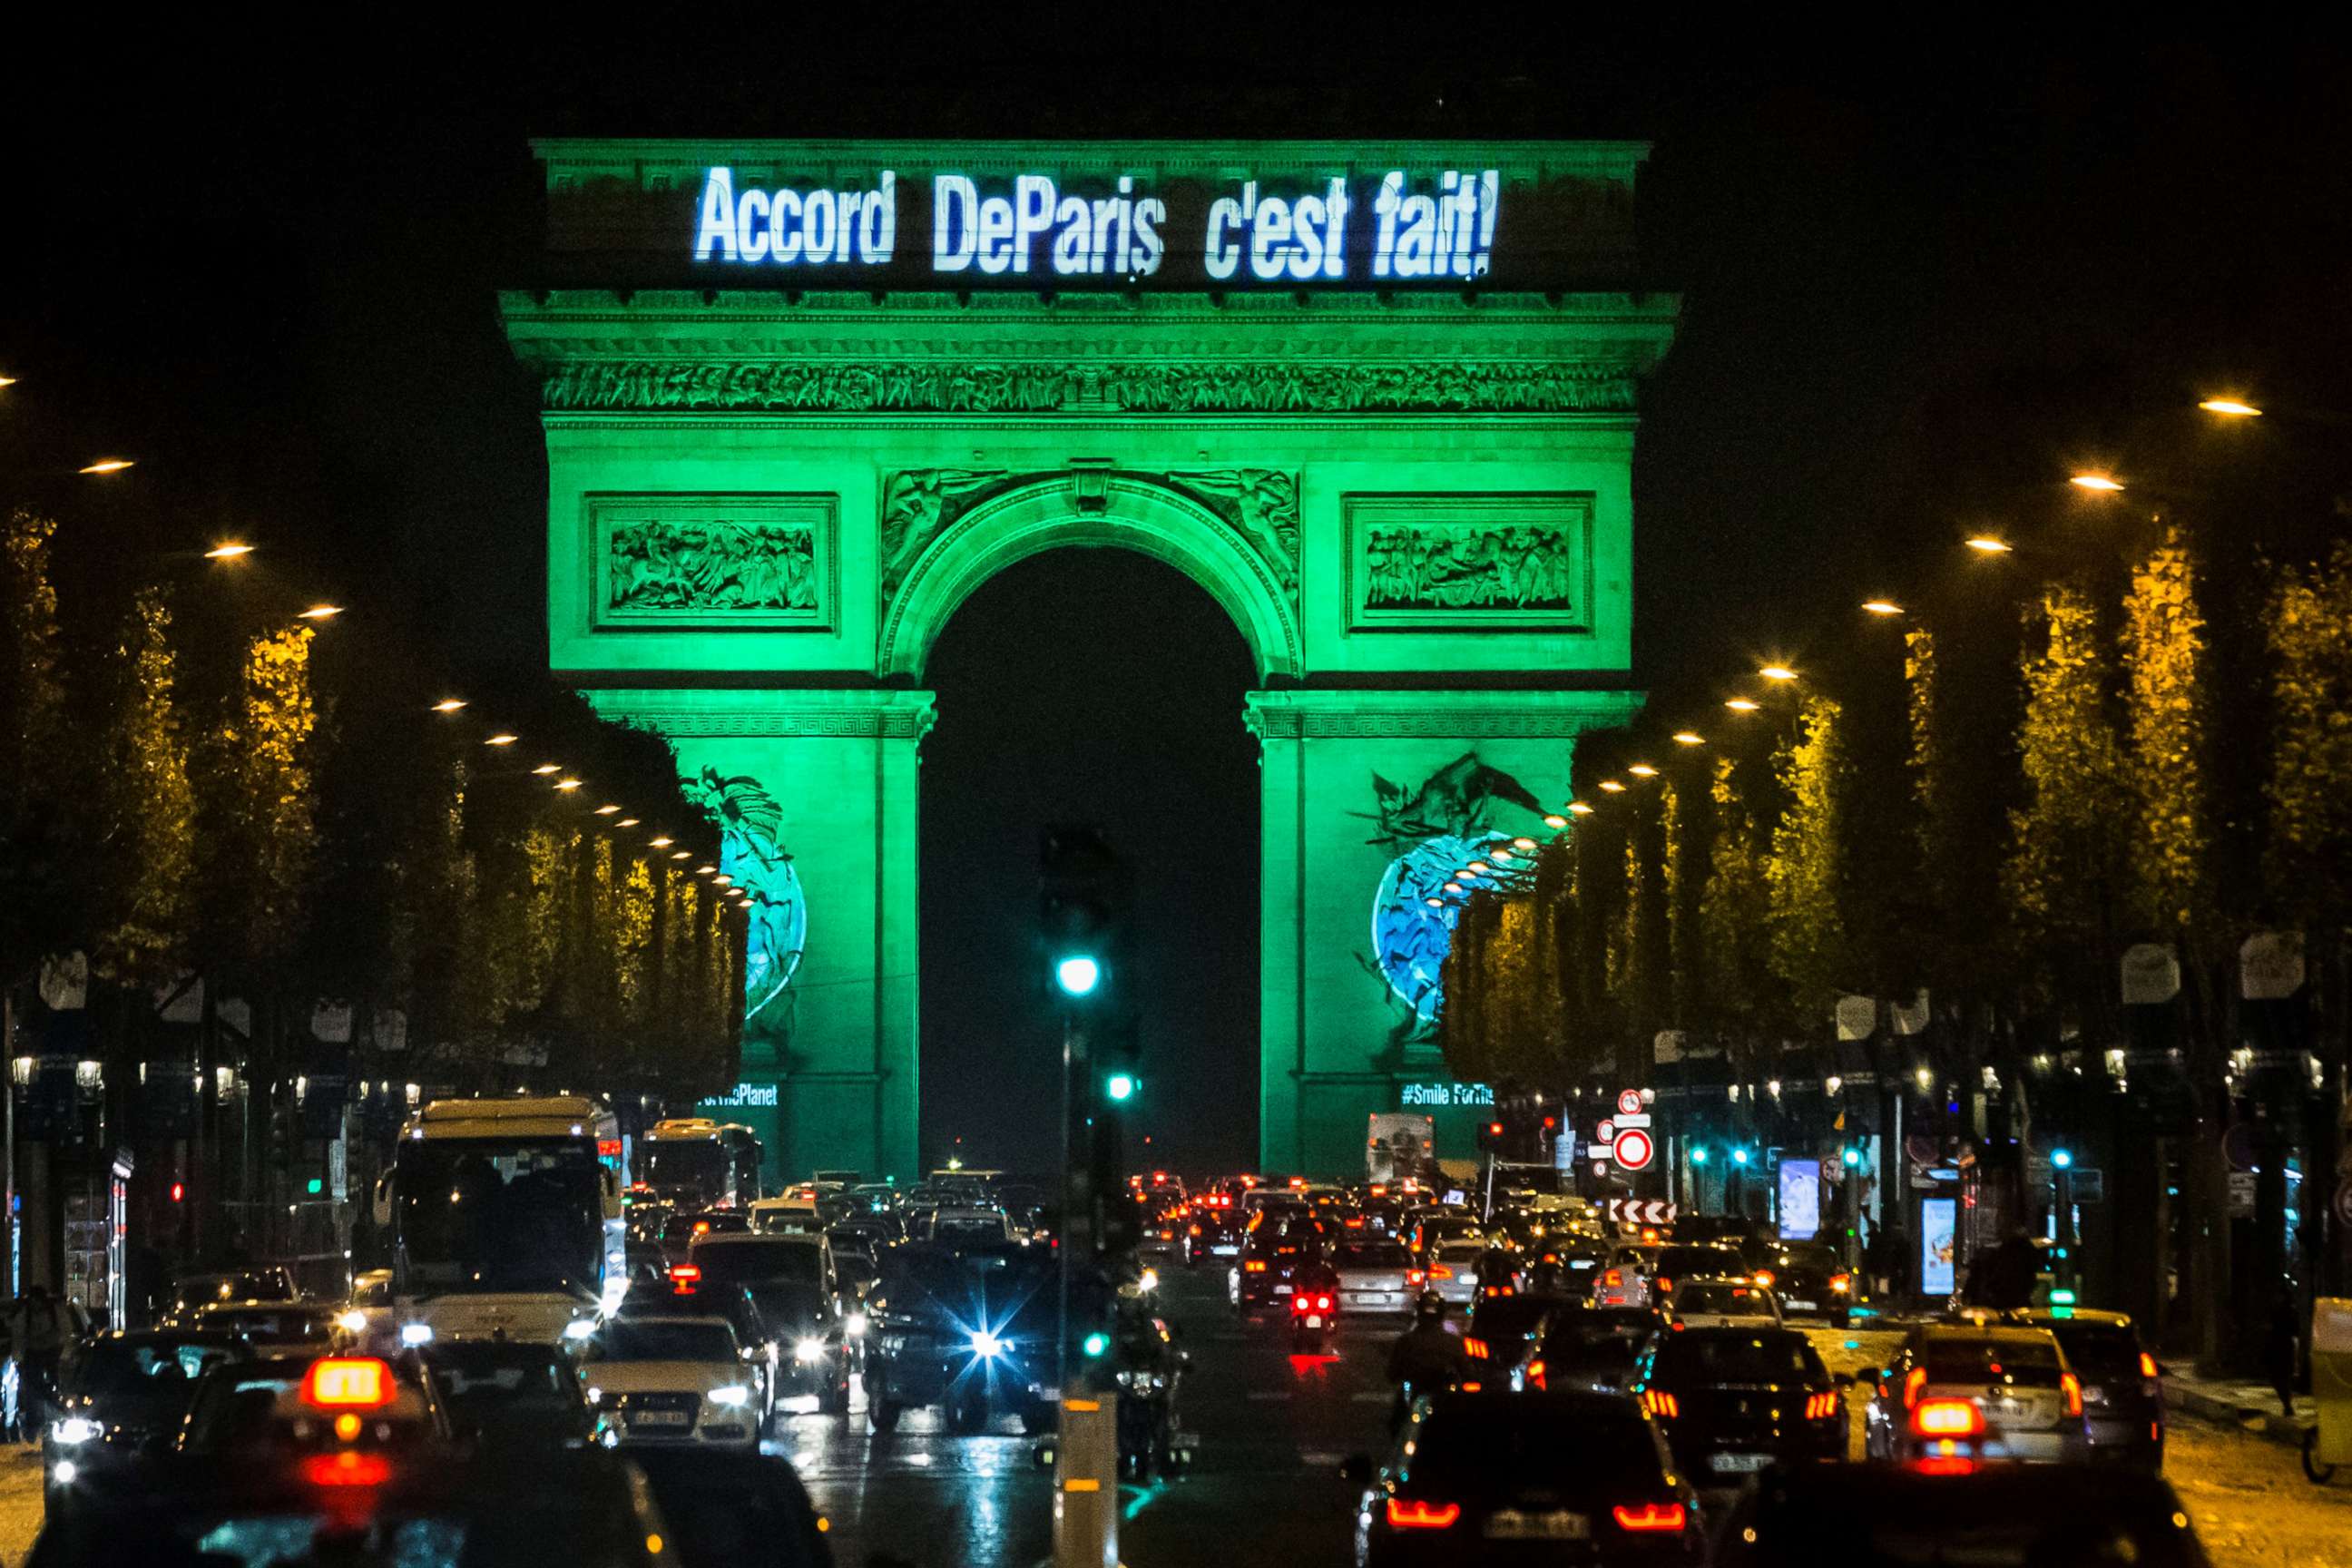 PHOTO: The Arc de Triomphe is illuminated in green to celebrate the ratification of the COP21 (Conference of the Parties Climate Conference) climate change agreement in Paris, Nov. 4, 2016. 